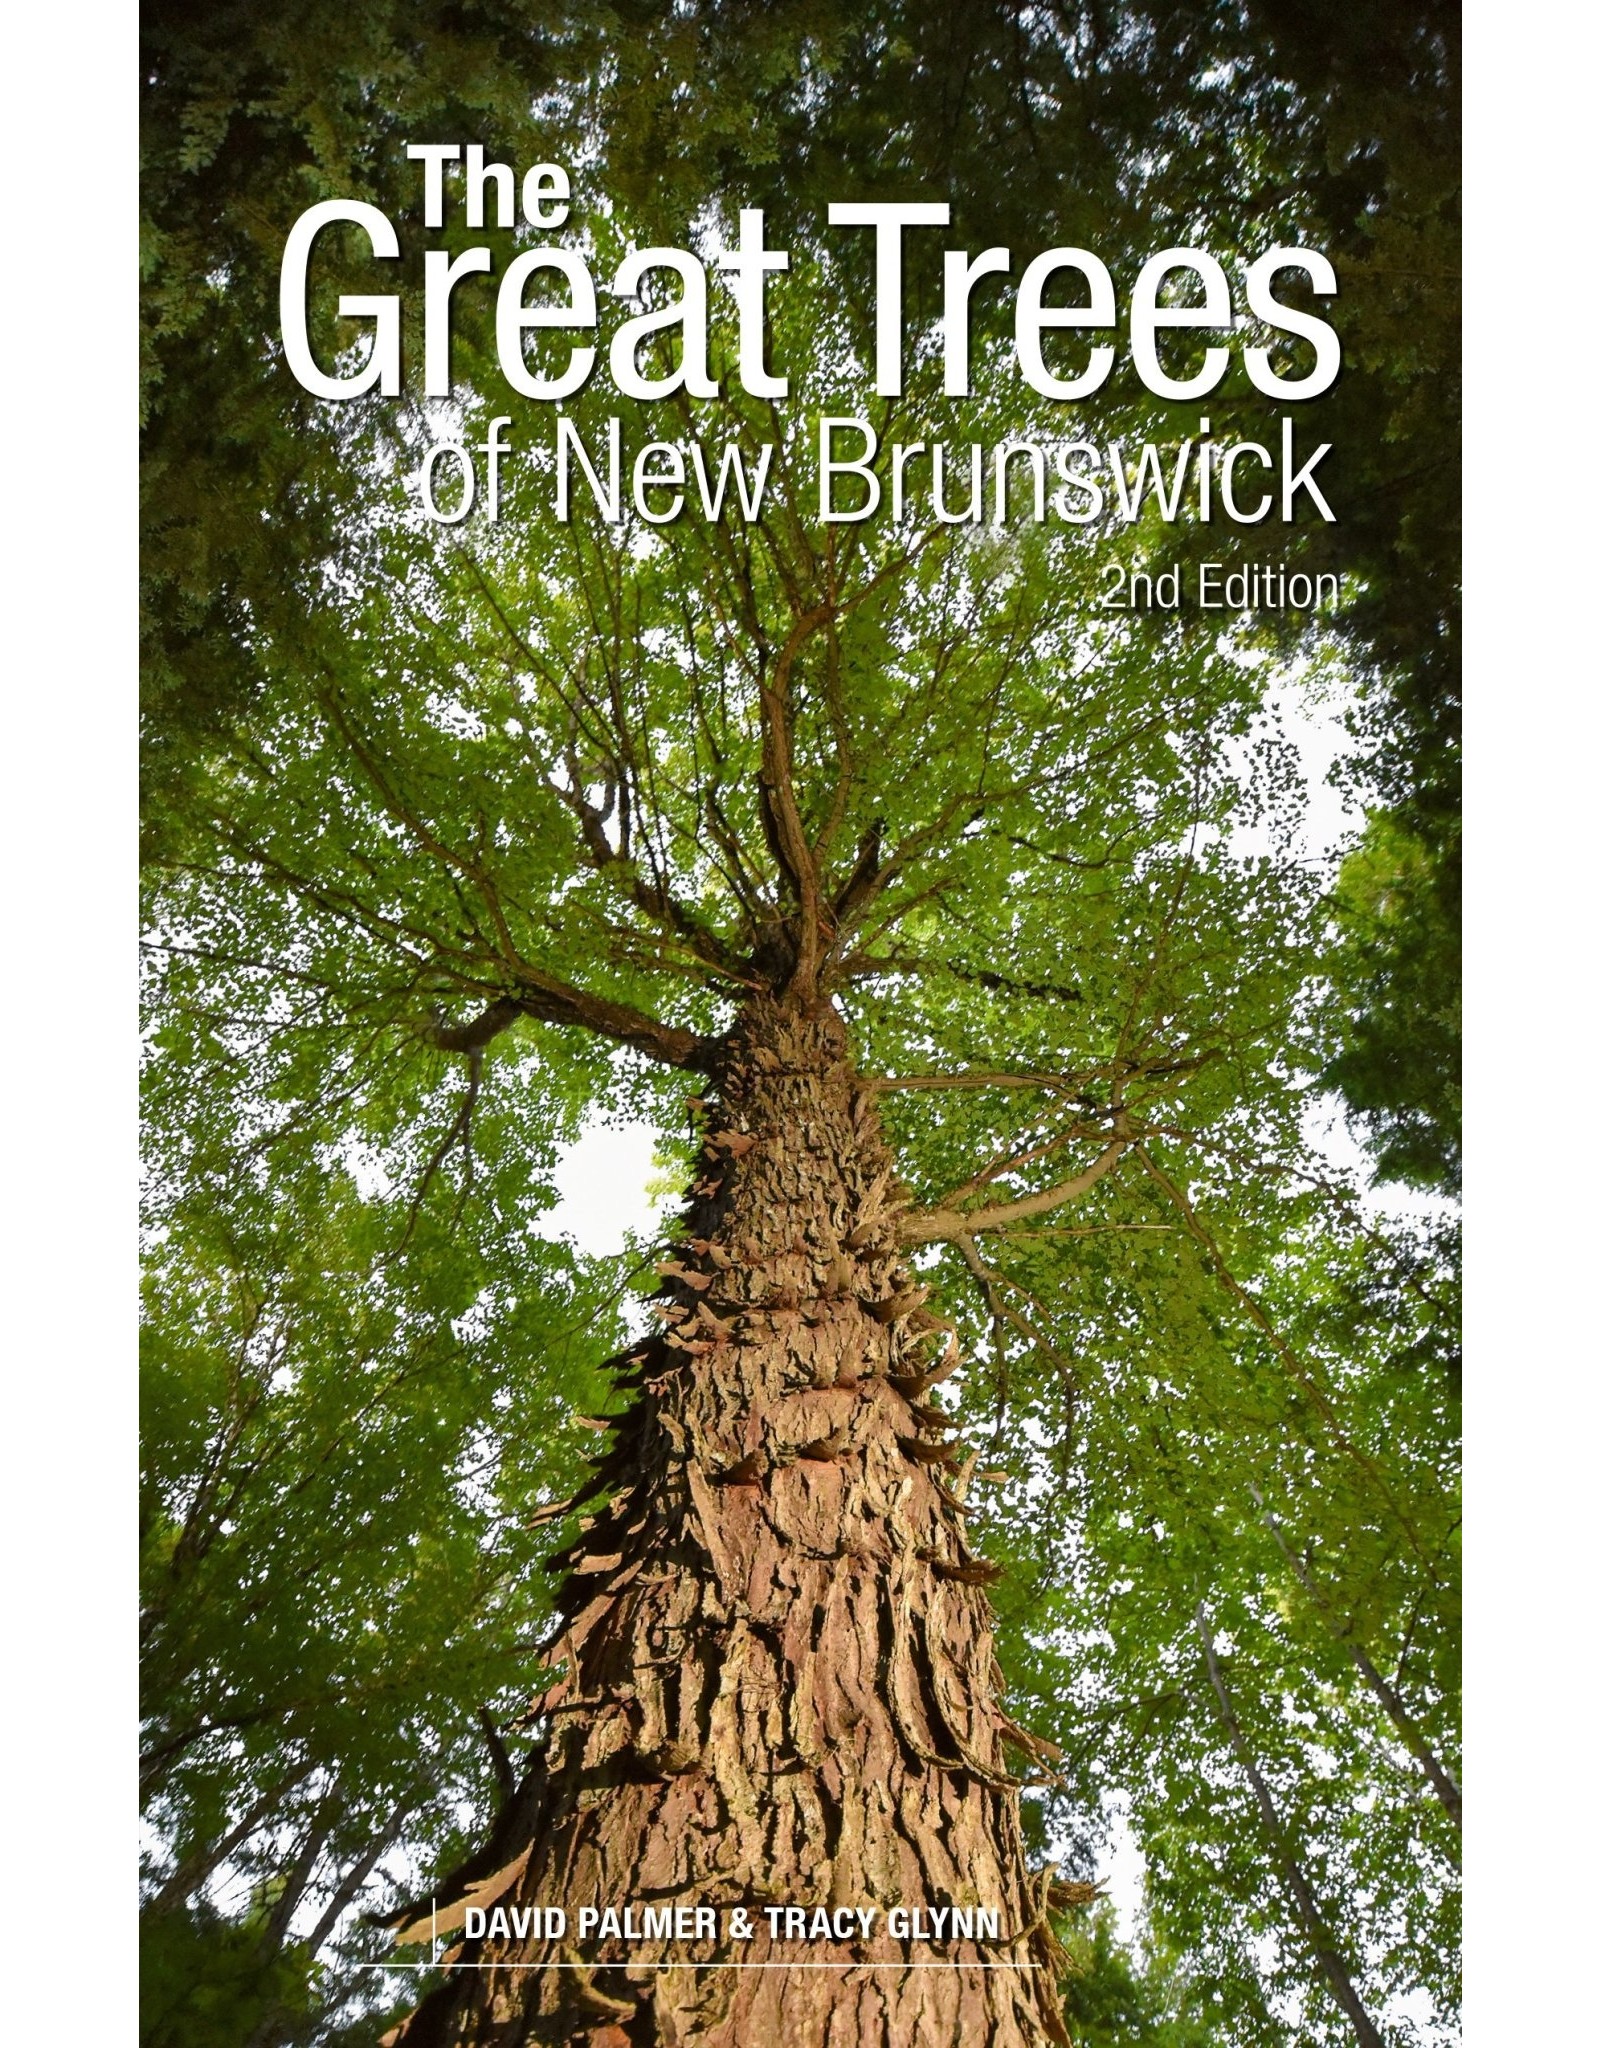 The Great Trees of New Brunswick